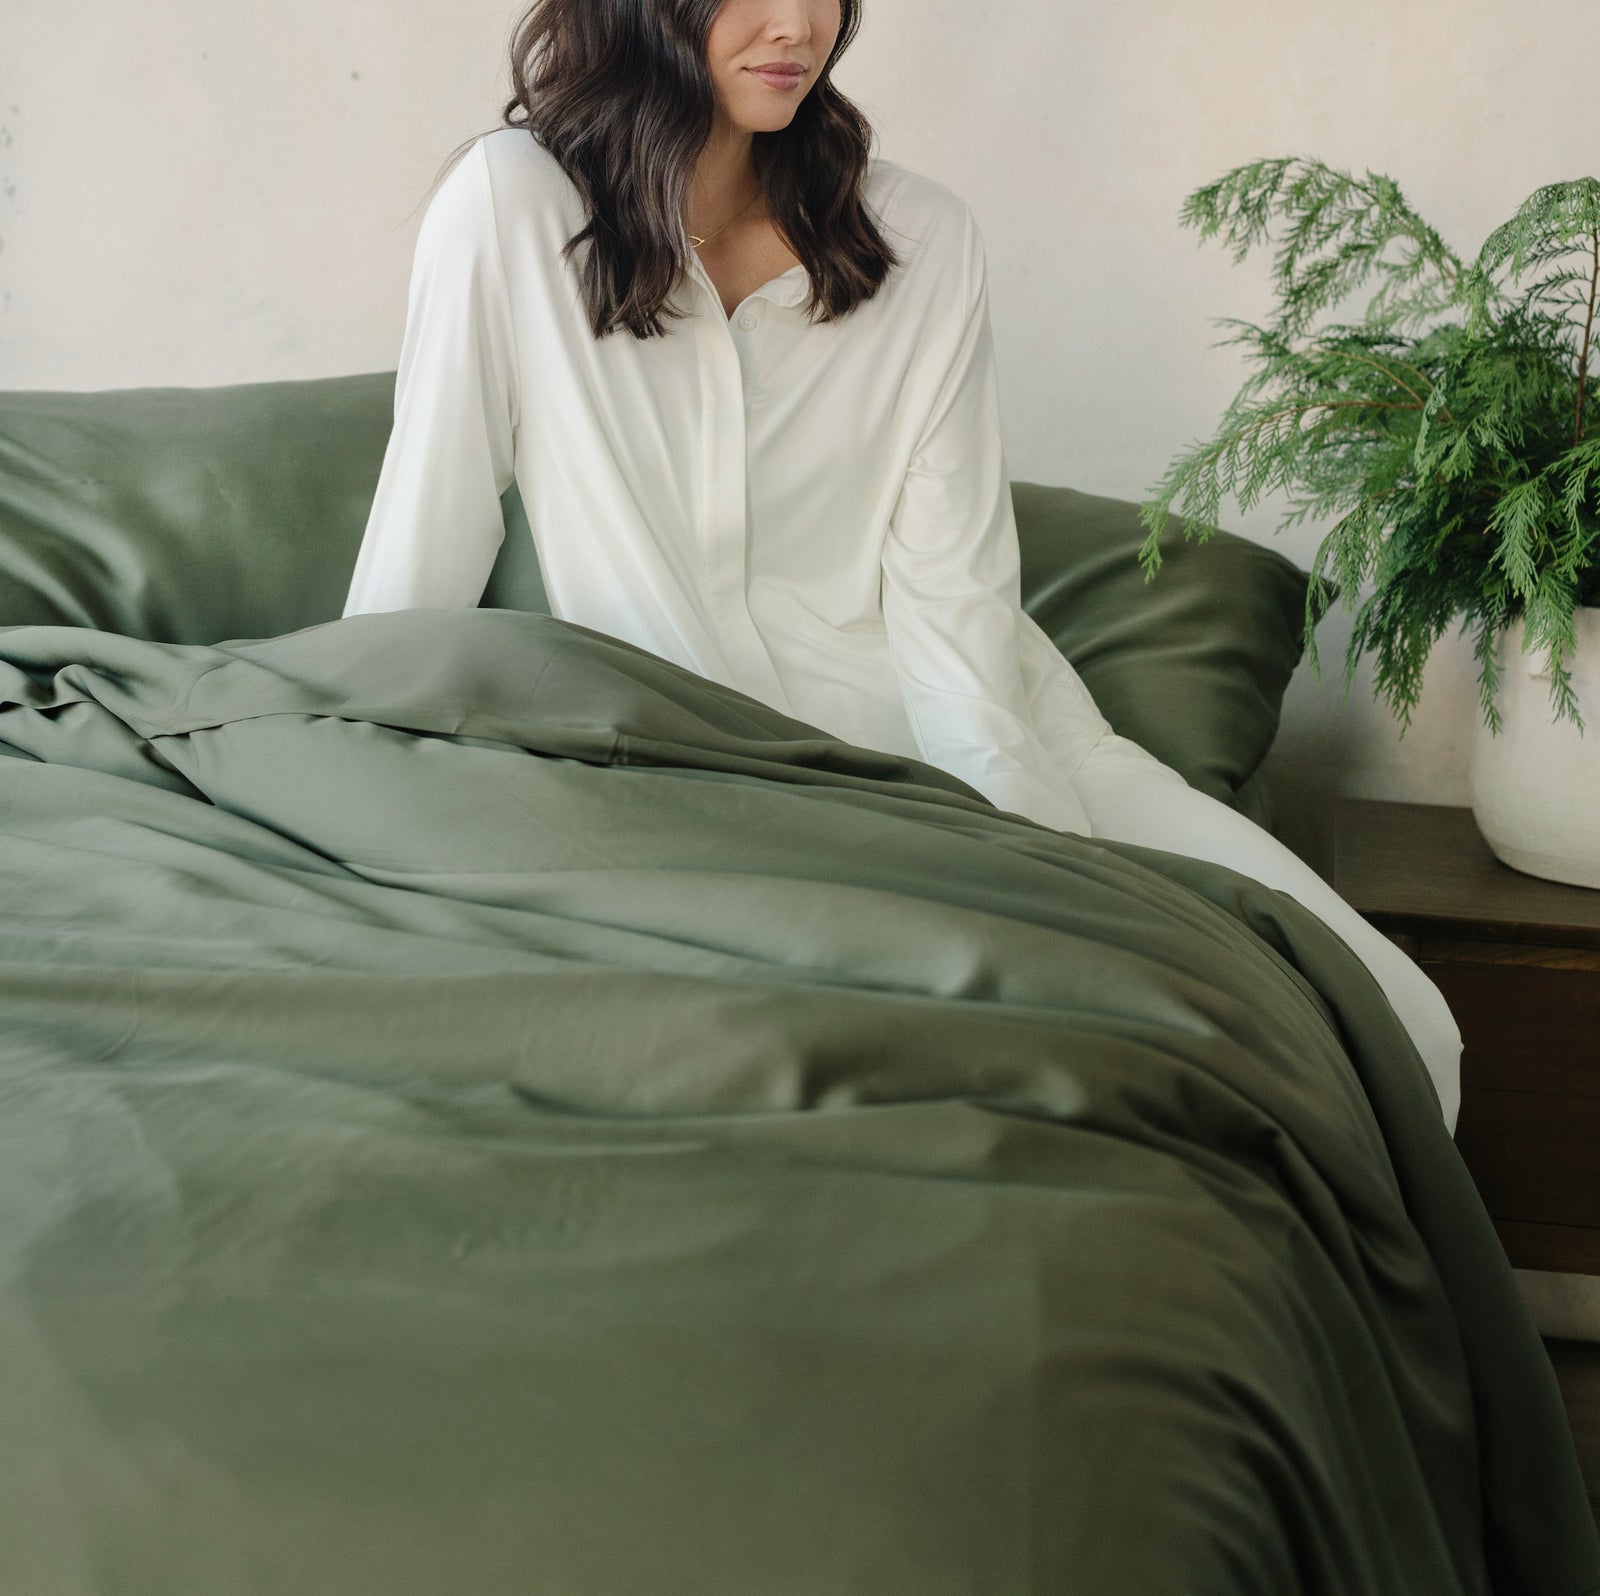 Woman in white pajamas sitting on bed with olive bedding 